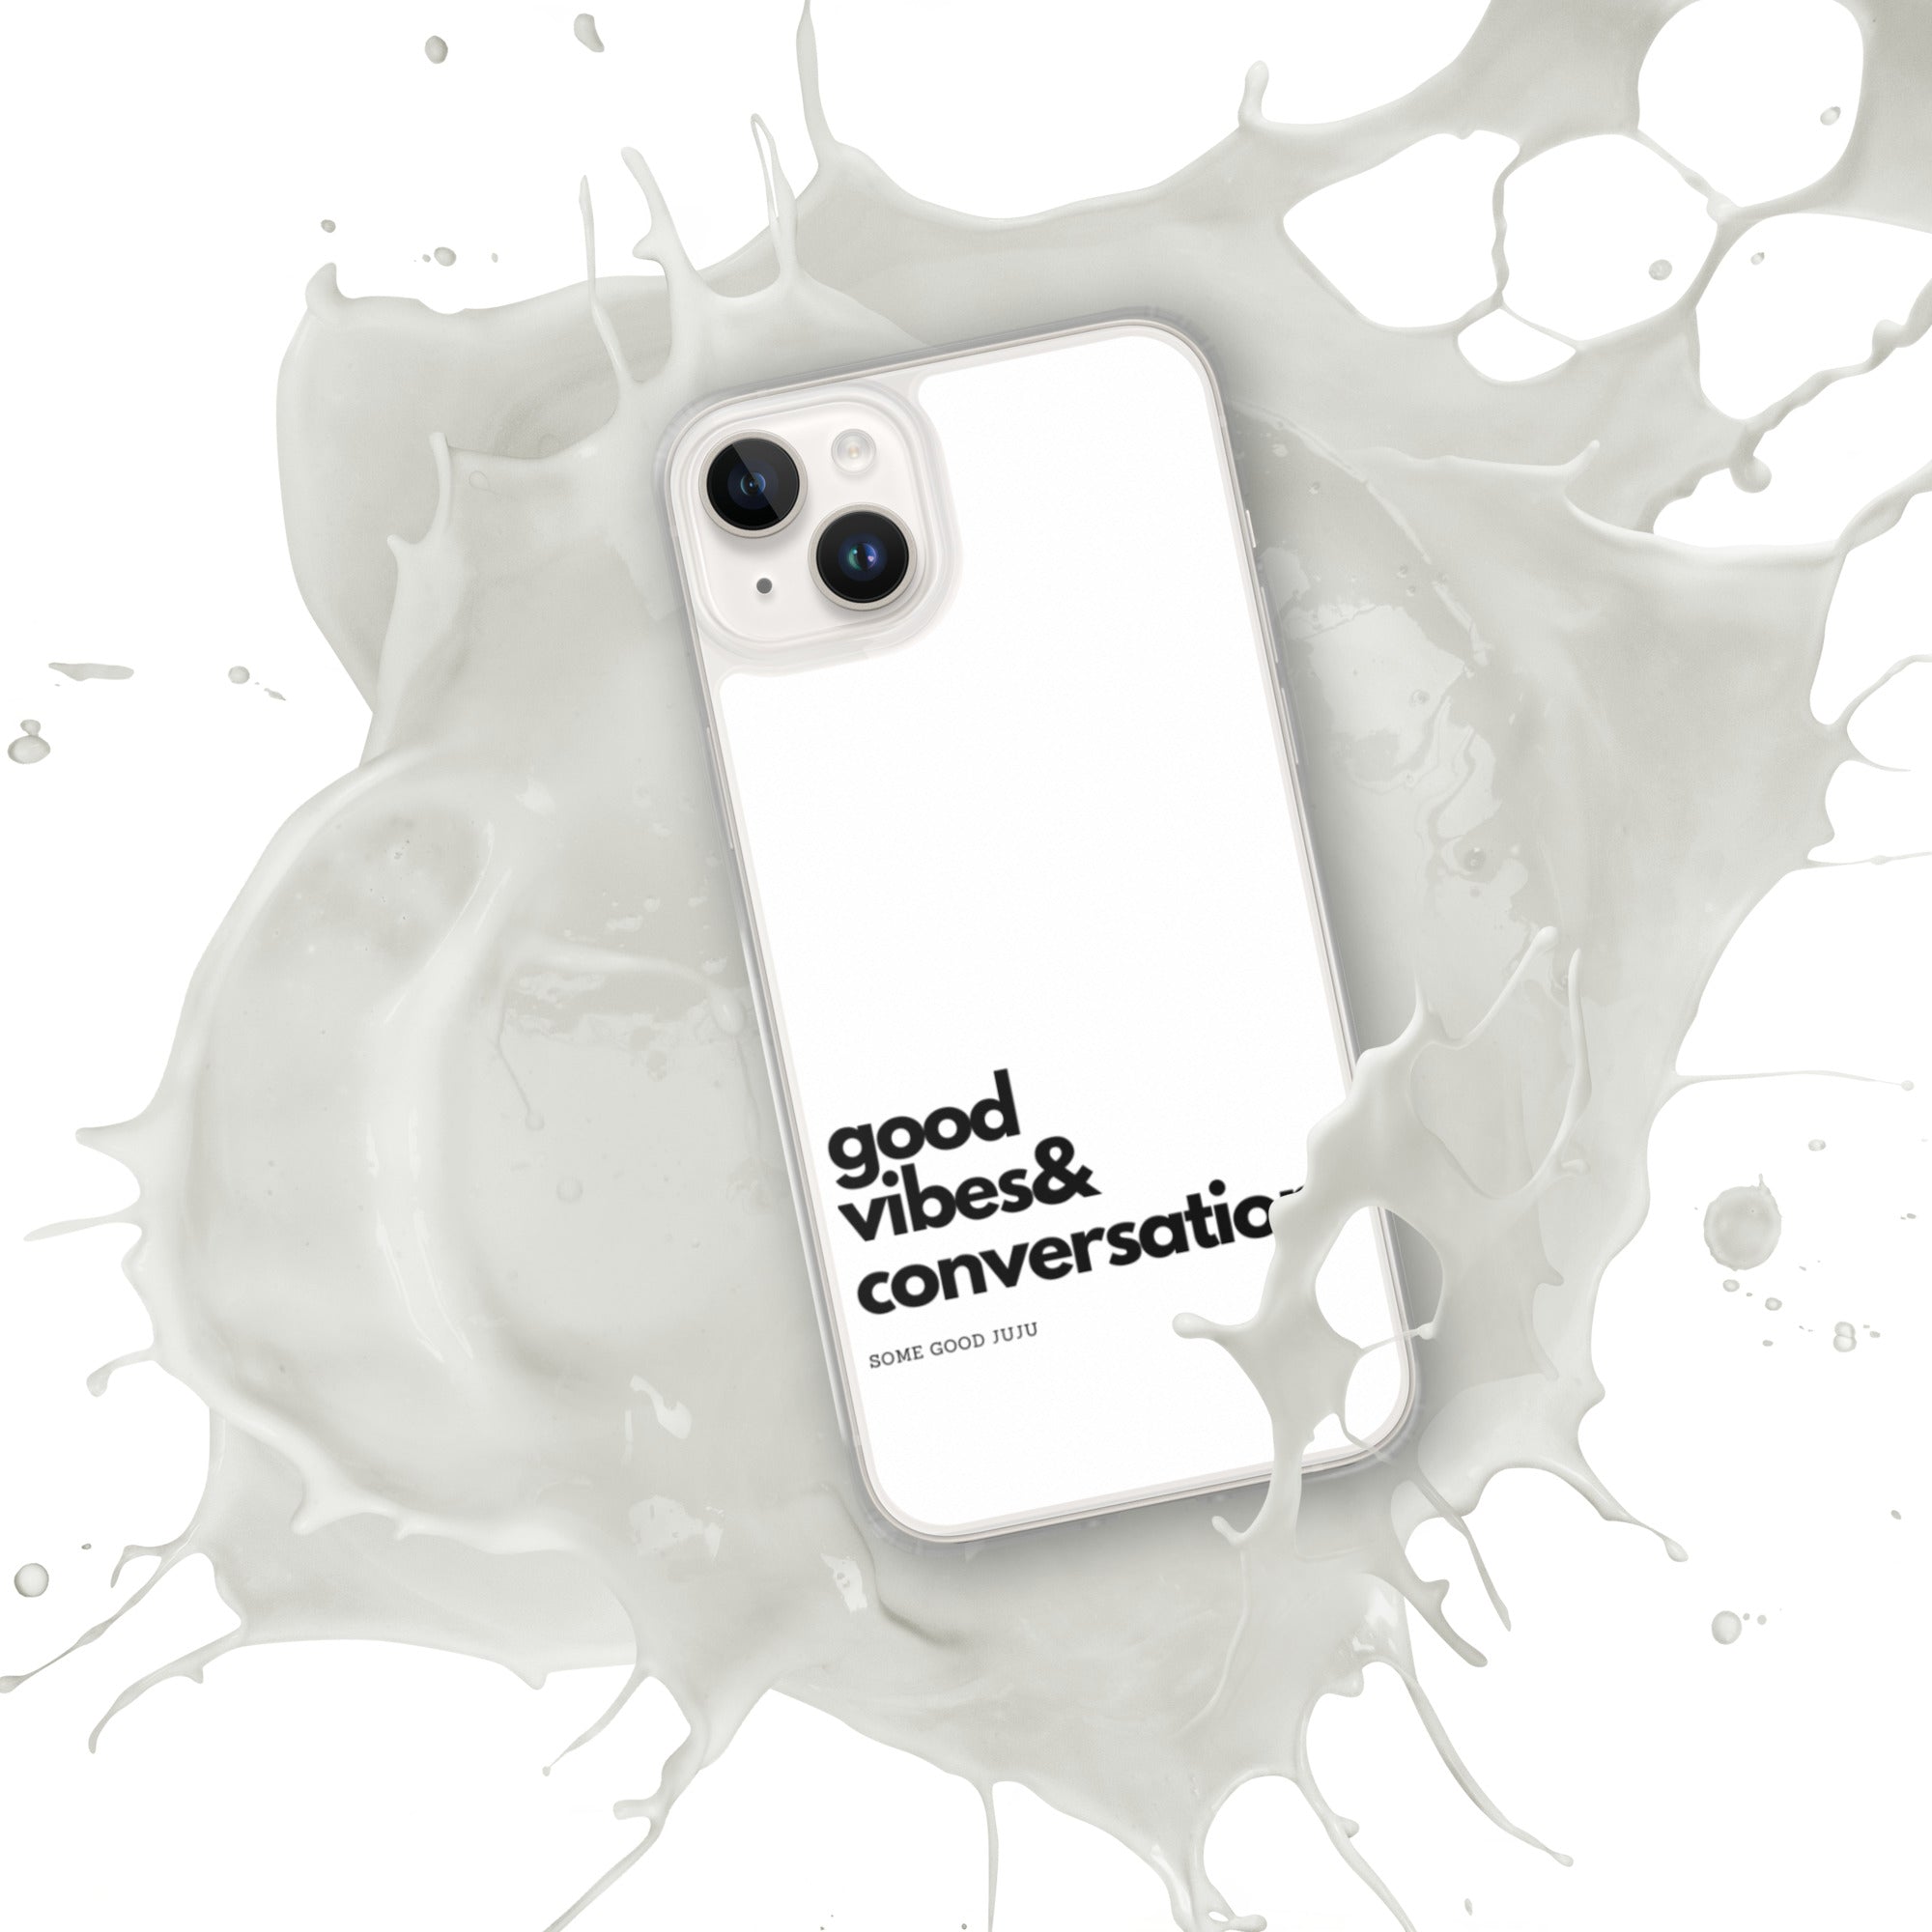 iPhone Case - Some Good JuJu Candle & Lifestyle Boutique 